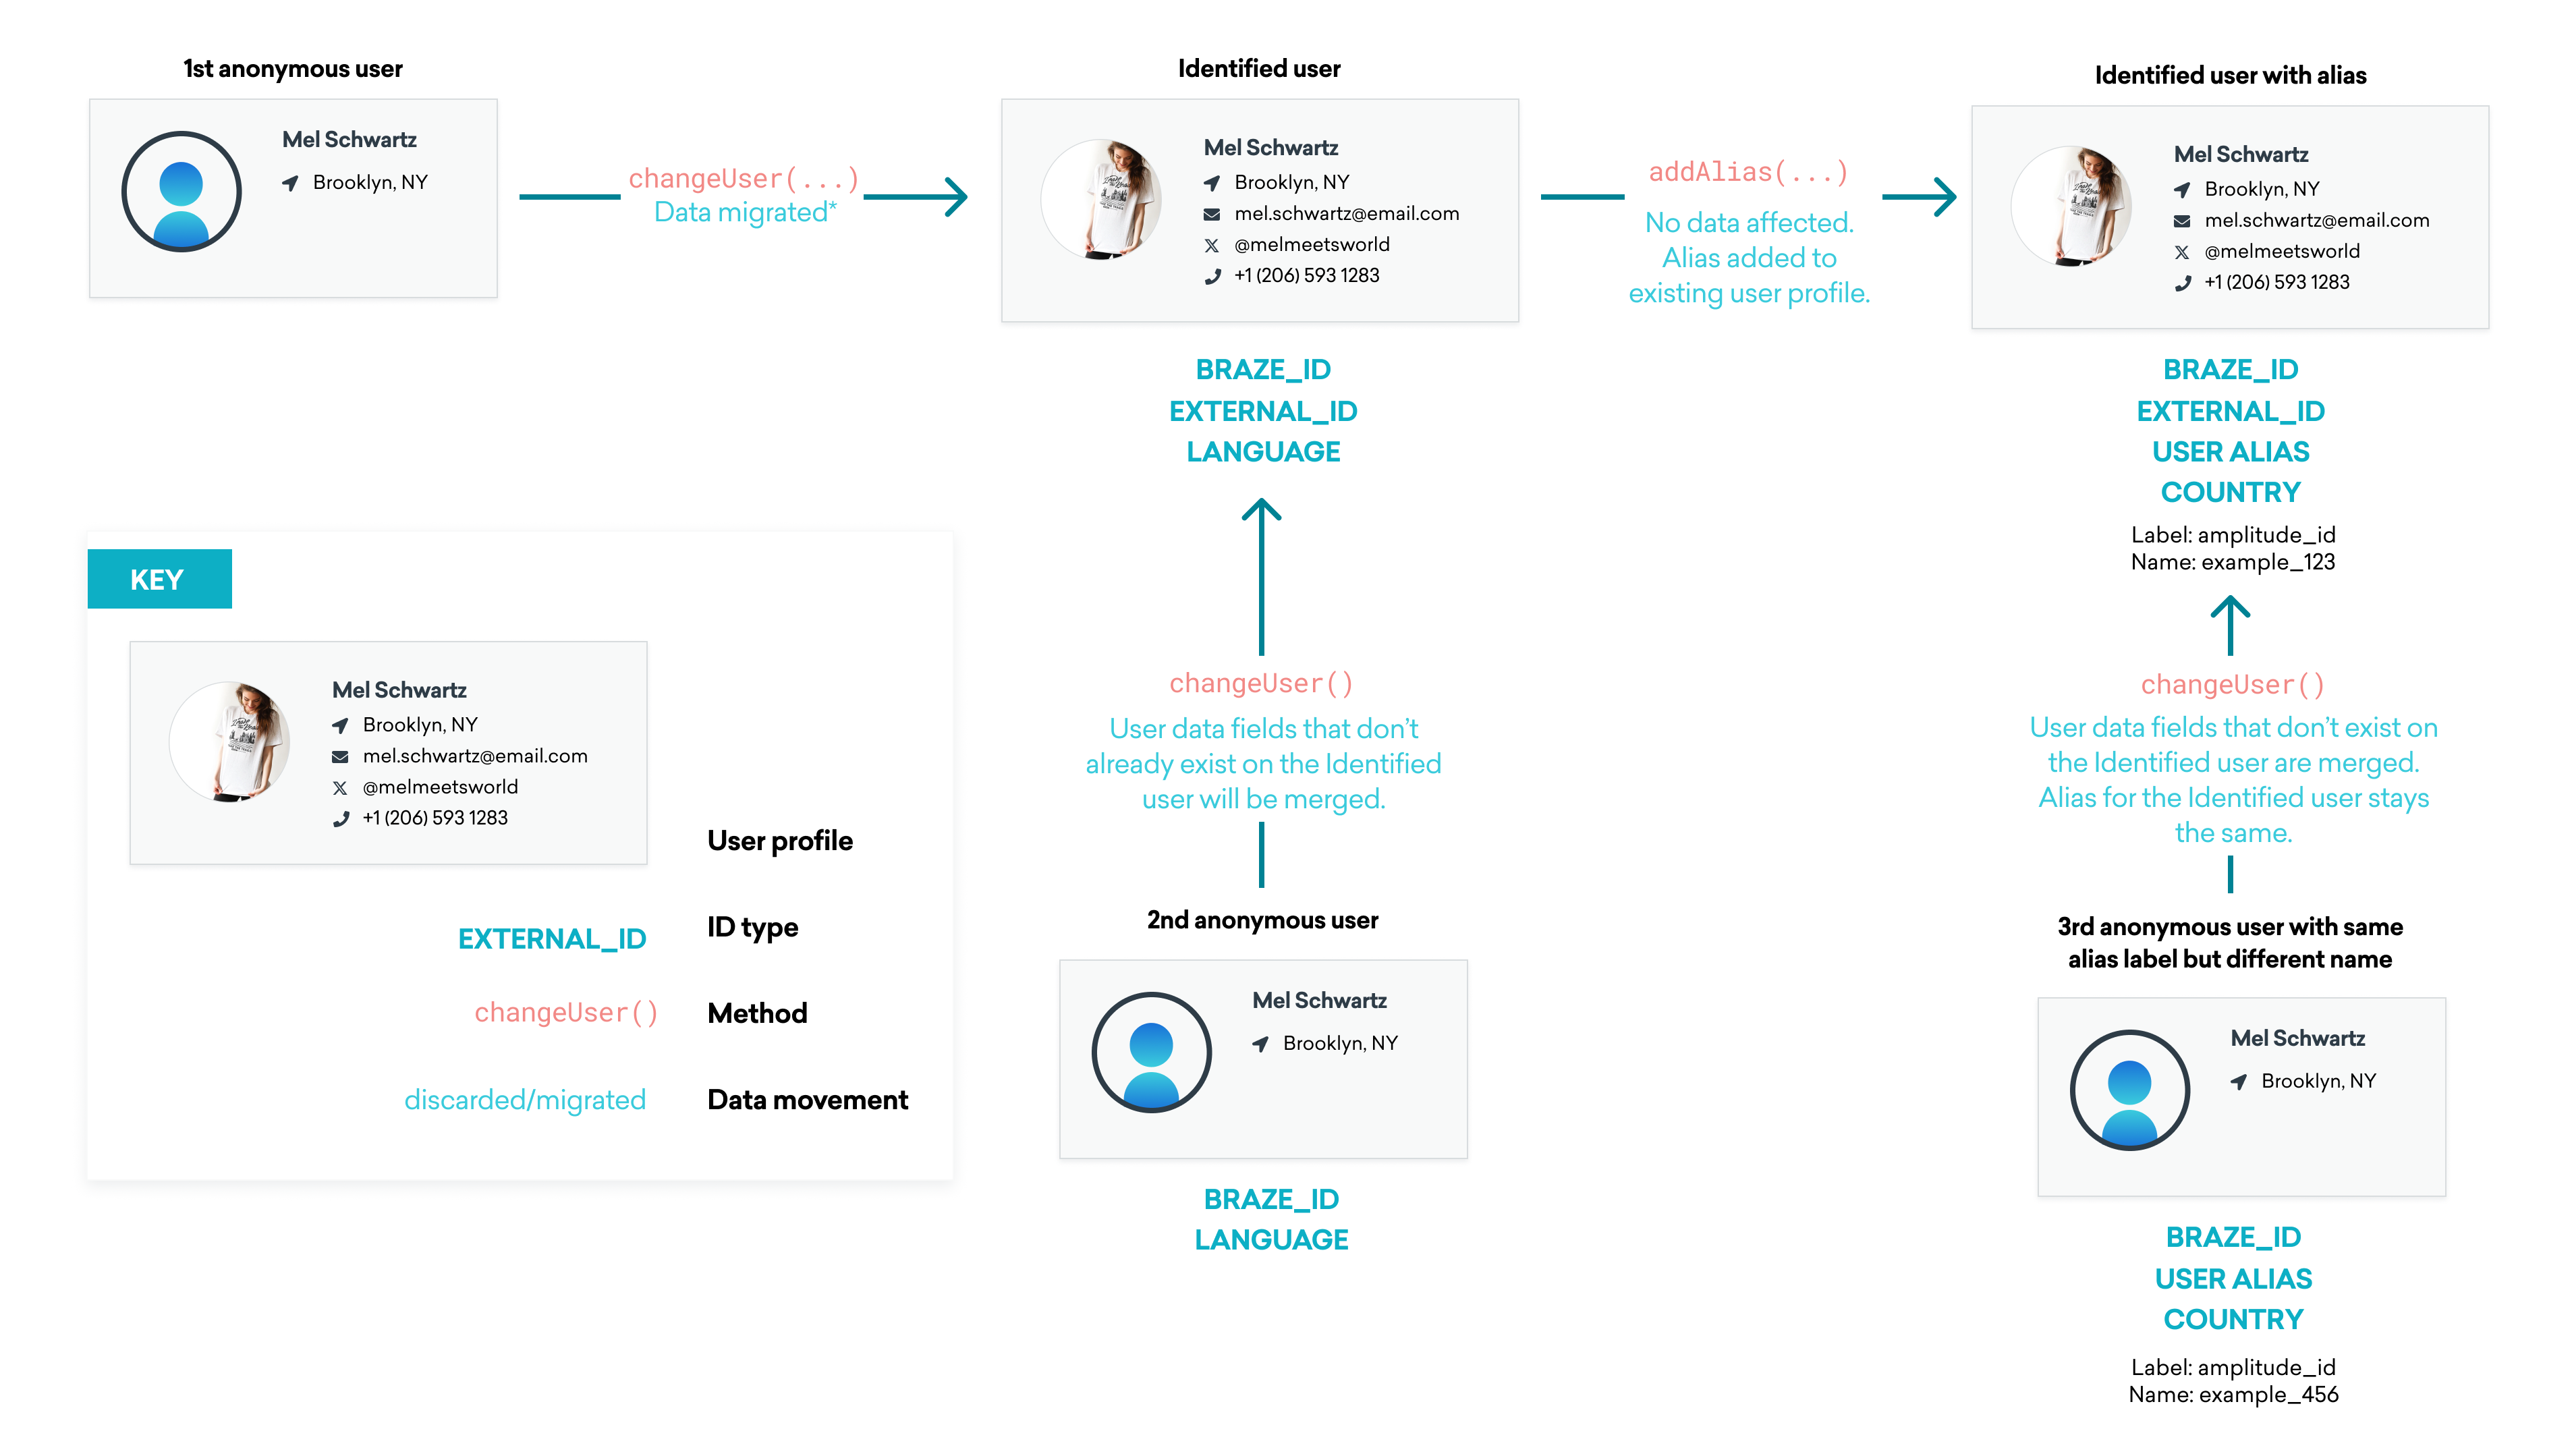 A flow chart of a user profile's lifecycle in Braze. When changeUser() is called for an anonymous user, that user becomes an Identified User and data is migrated to their identified user profile. The Identified User has a Braze ID and external ID. At this point, if a second anonymous user has changeUser() called, user data fields that do not already exist on the Identified User will be merged. If the Identified User has an alias added to their existing user profile, no data will be affected but they will become an Identified User with alias. If a third anonymous user with the same alias label as the Identified User but a different alias name then has changeUser() called, any fields that do not exist on the Identified User will be merged and the alias label on the Identified User profile is maintained.